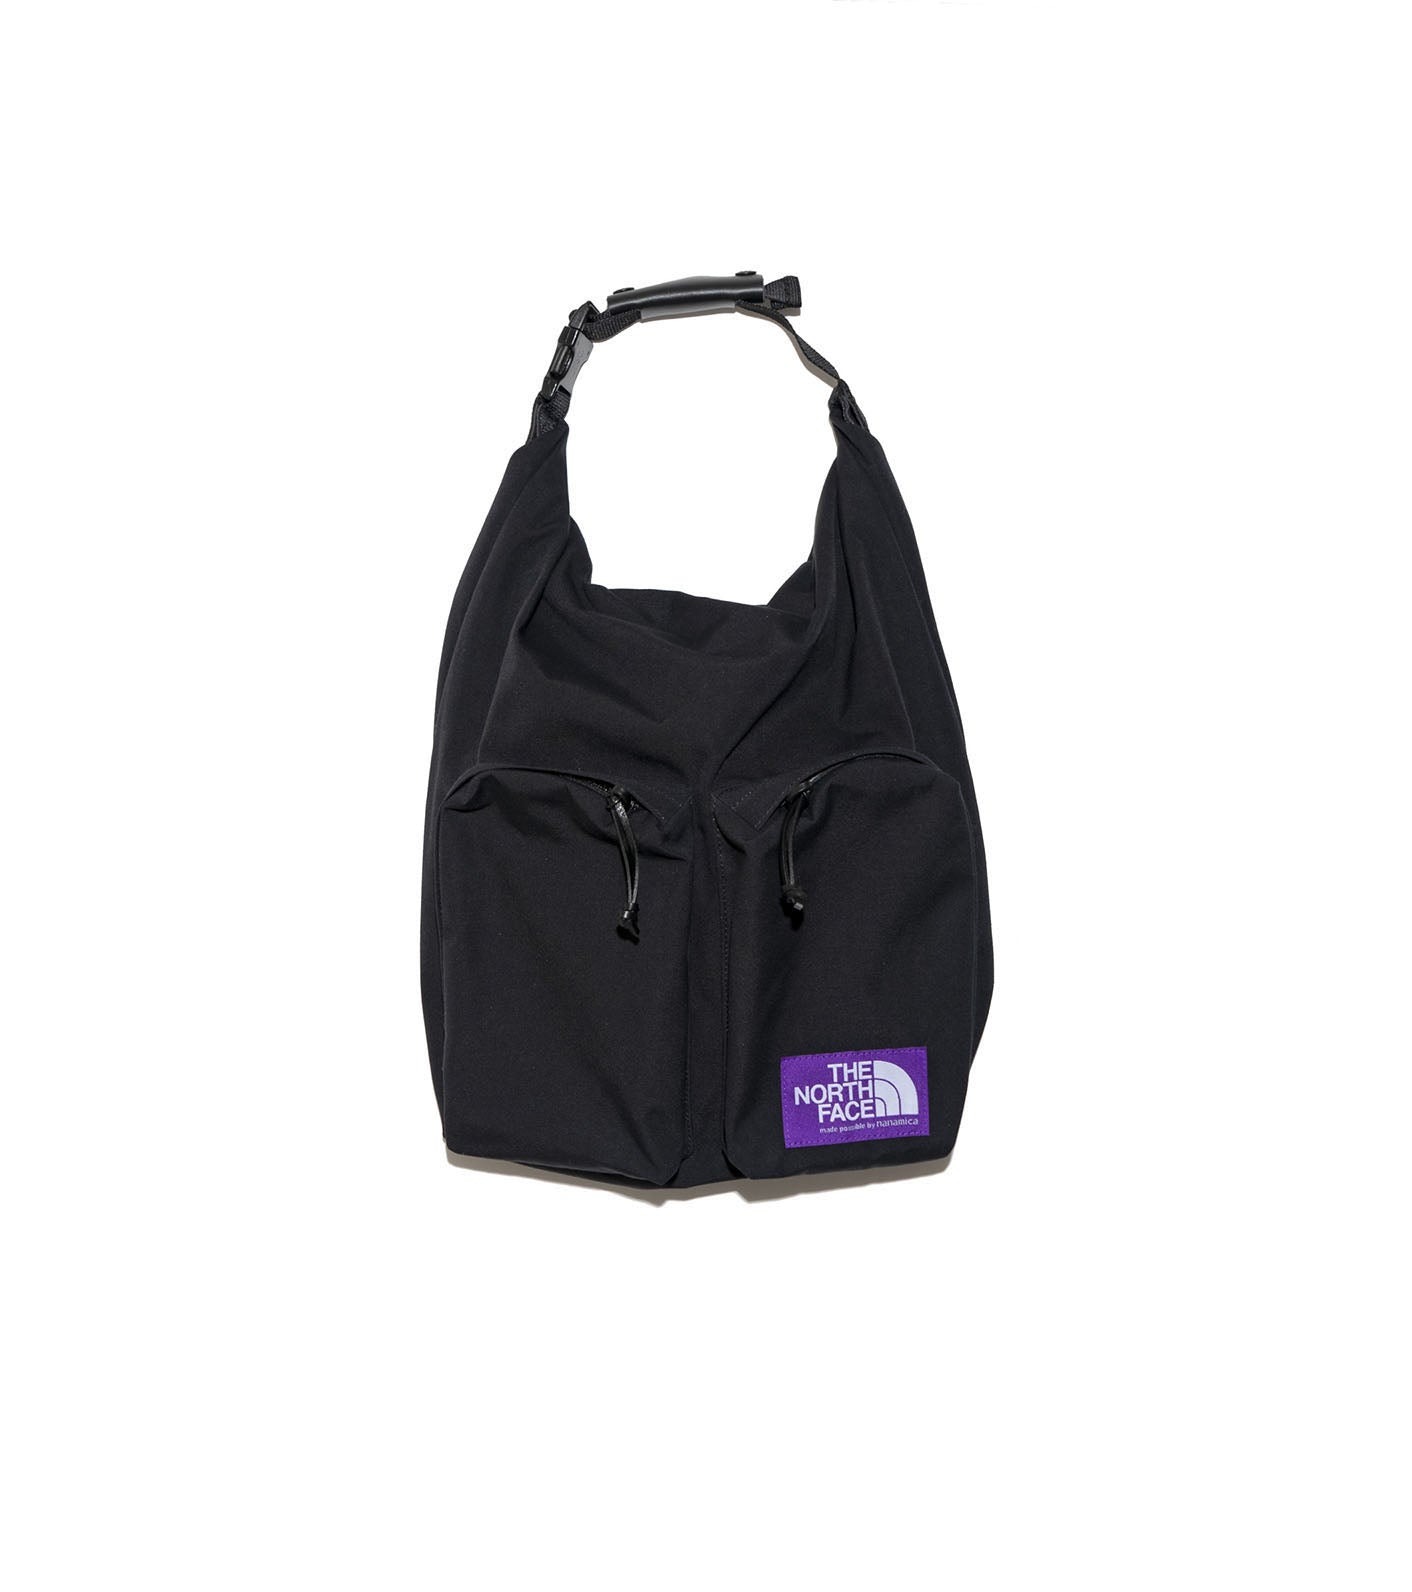 THE NORTH FACE PURPLE LABEL Field 2Way Tote Bag